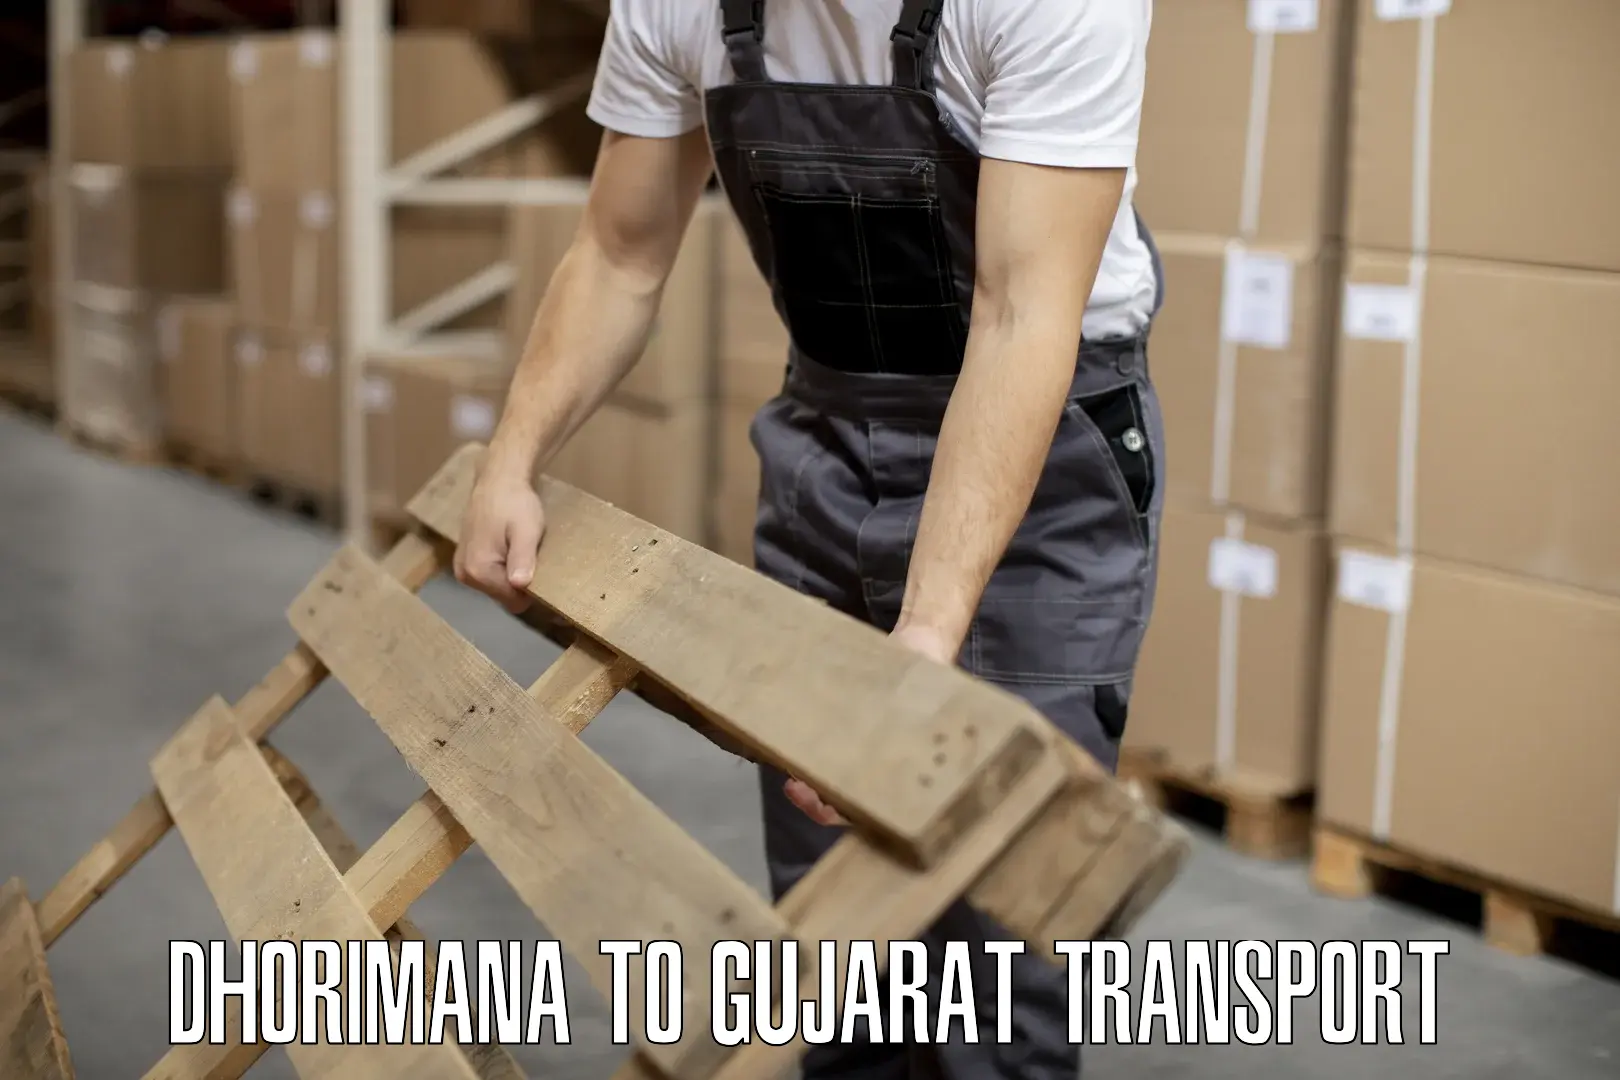 Transport shared services in Dhorimana to Rumkitalav